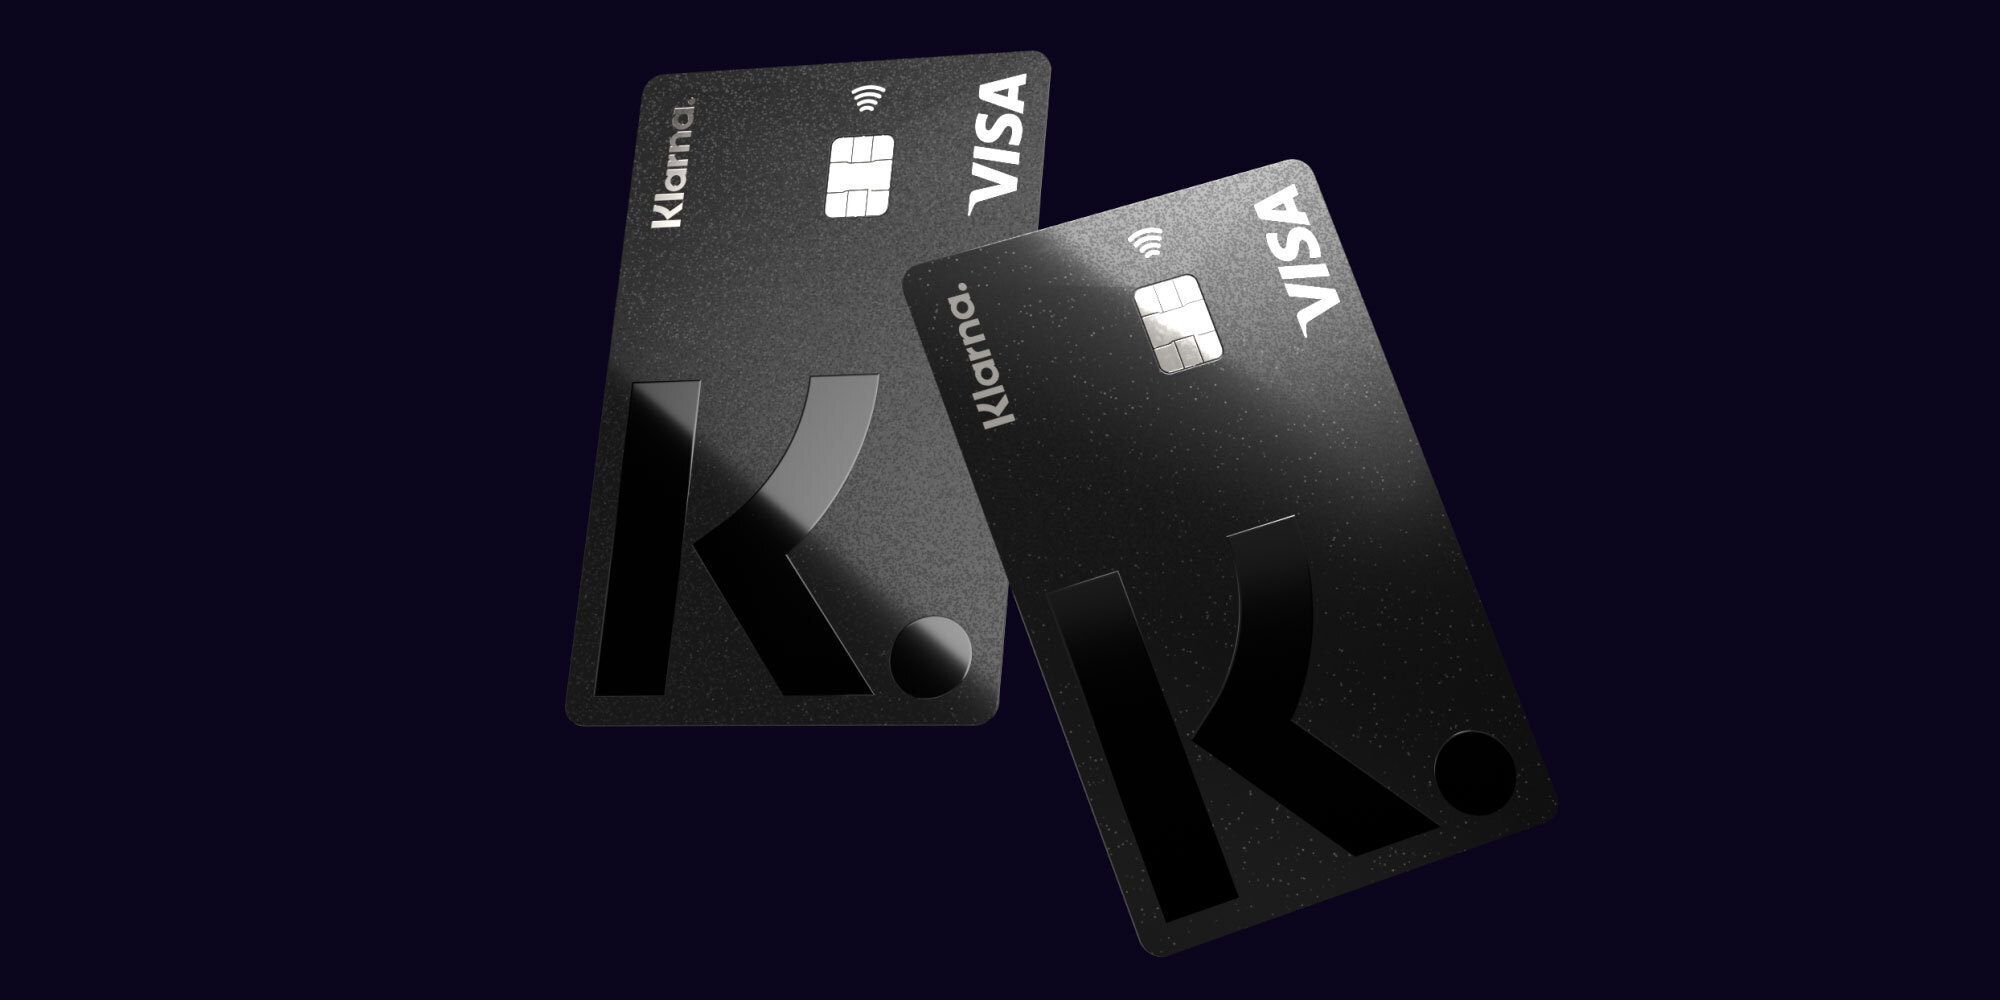 Klarna Expands U.S. Offerings with New Credit Card Launch